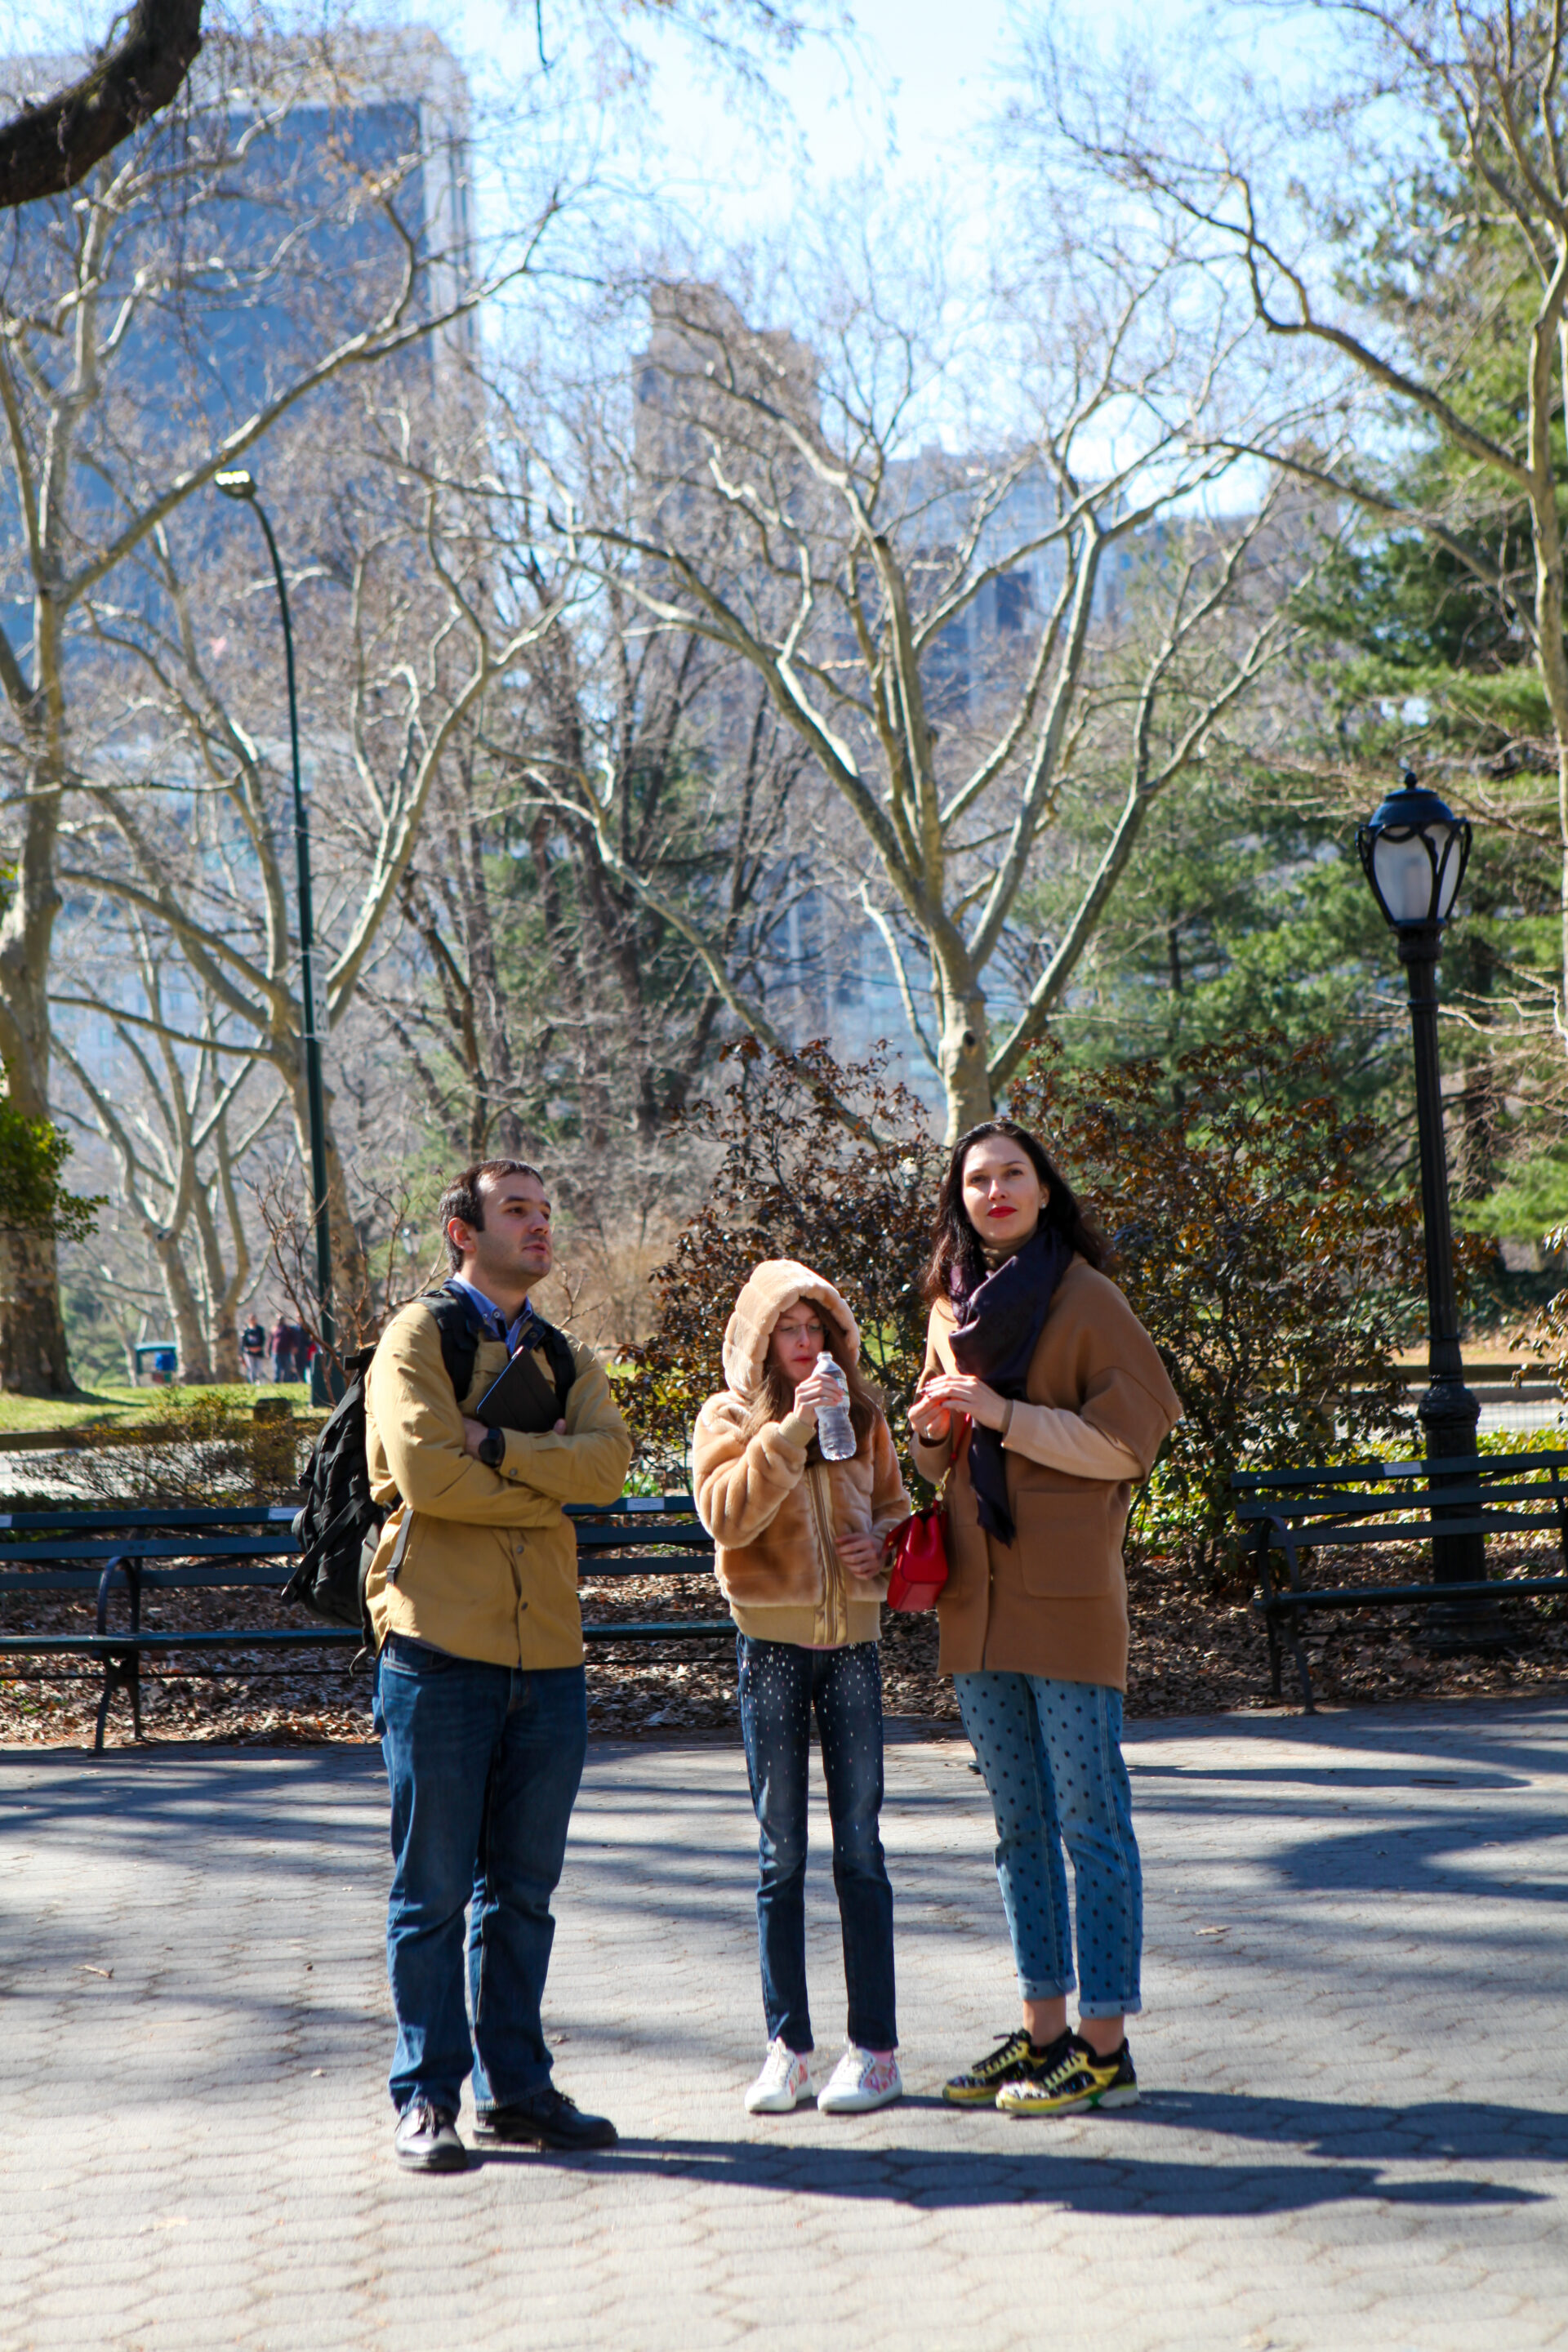 a guide is standing next to this 2 guests while on a tour of central park